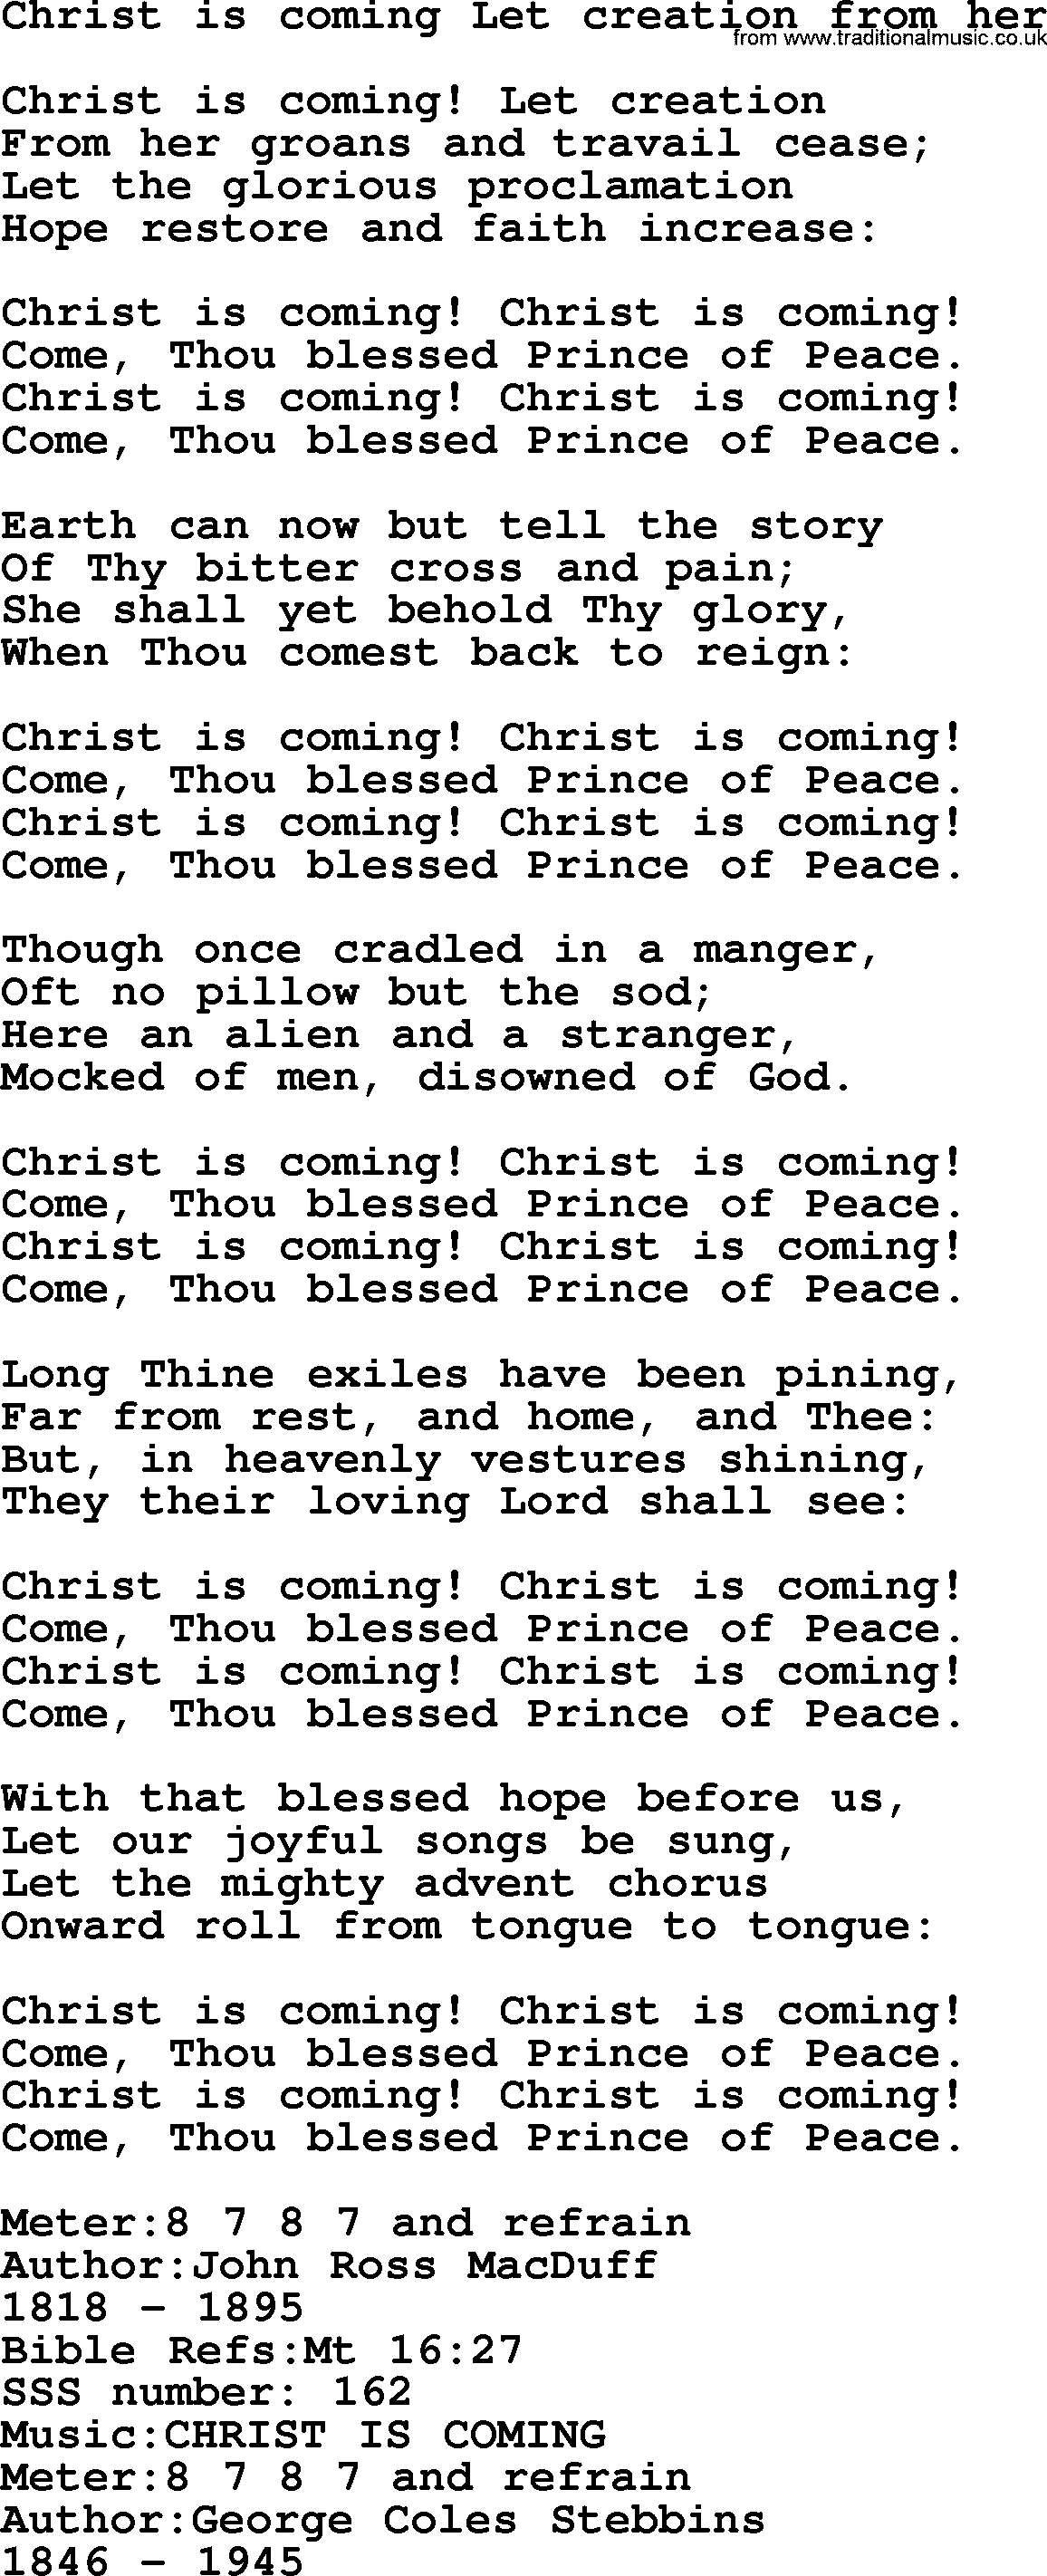 Sacred Songs and Solos complete, 1200 Hymns, title: Christ Is Coming Let Creation From Her, lyrics and PDF